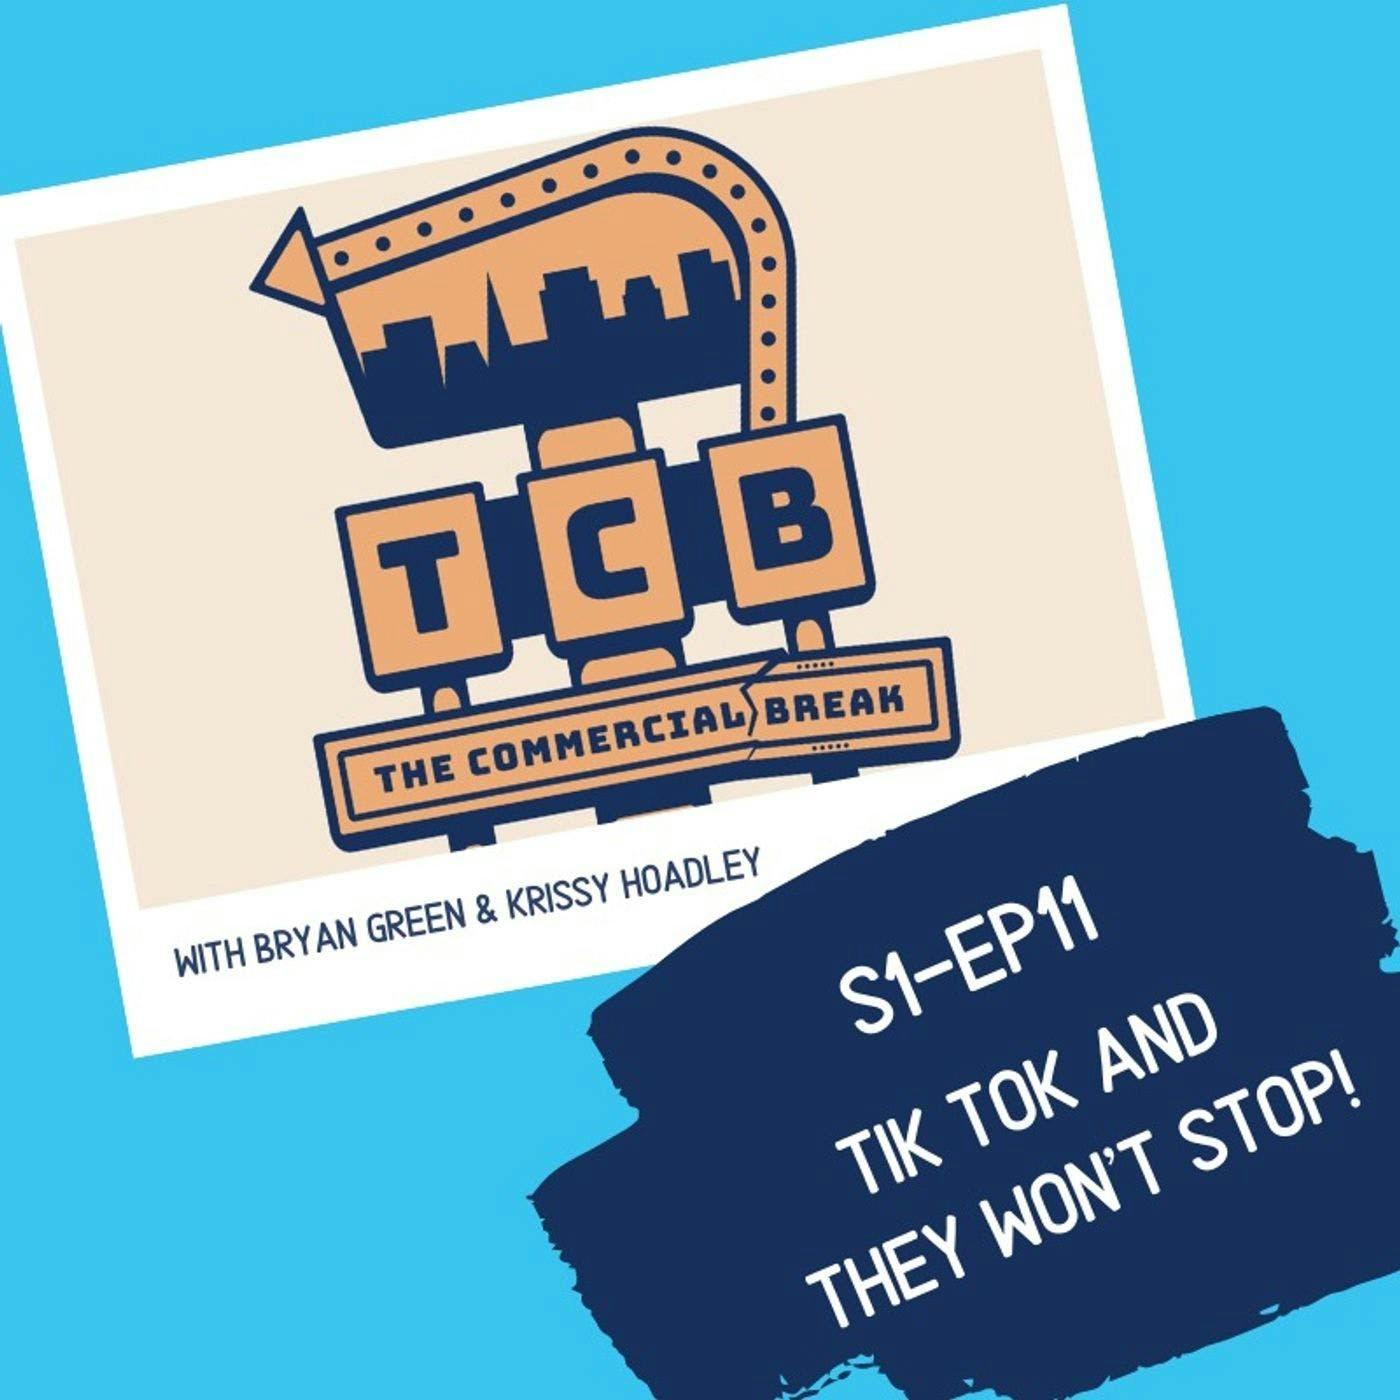 Tik Tok and They Won't Stop by Commercial Break LLC 